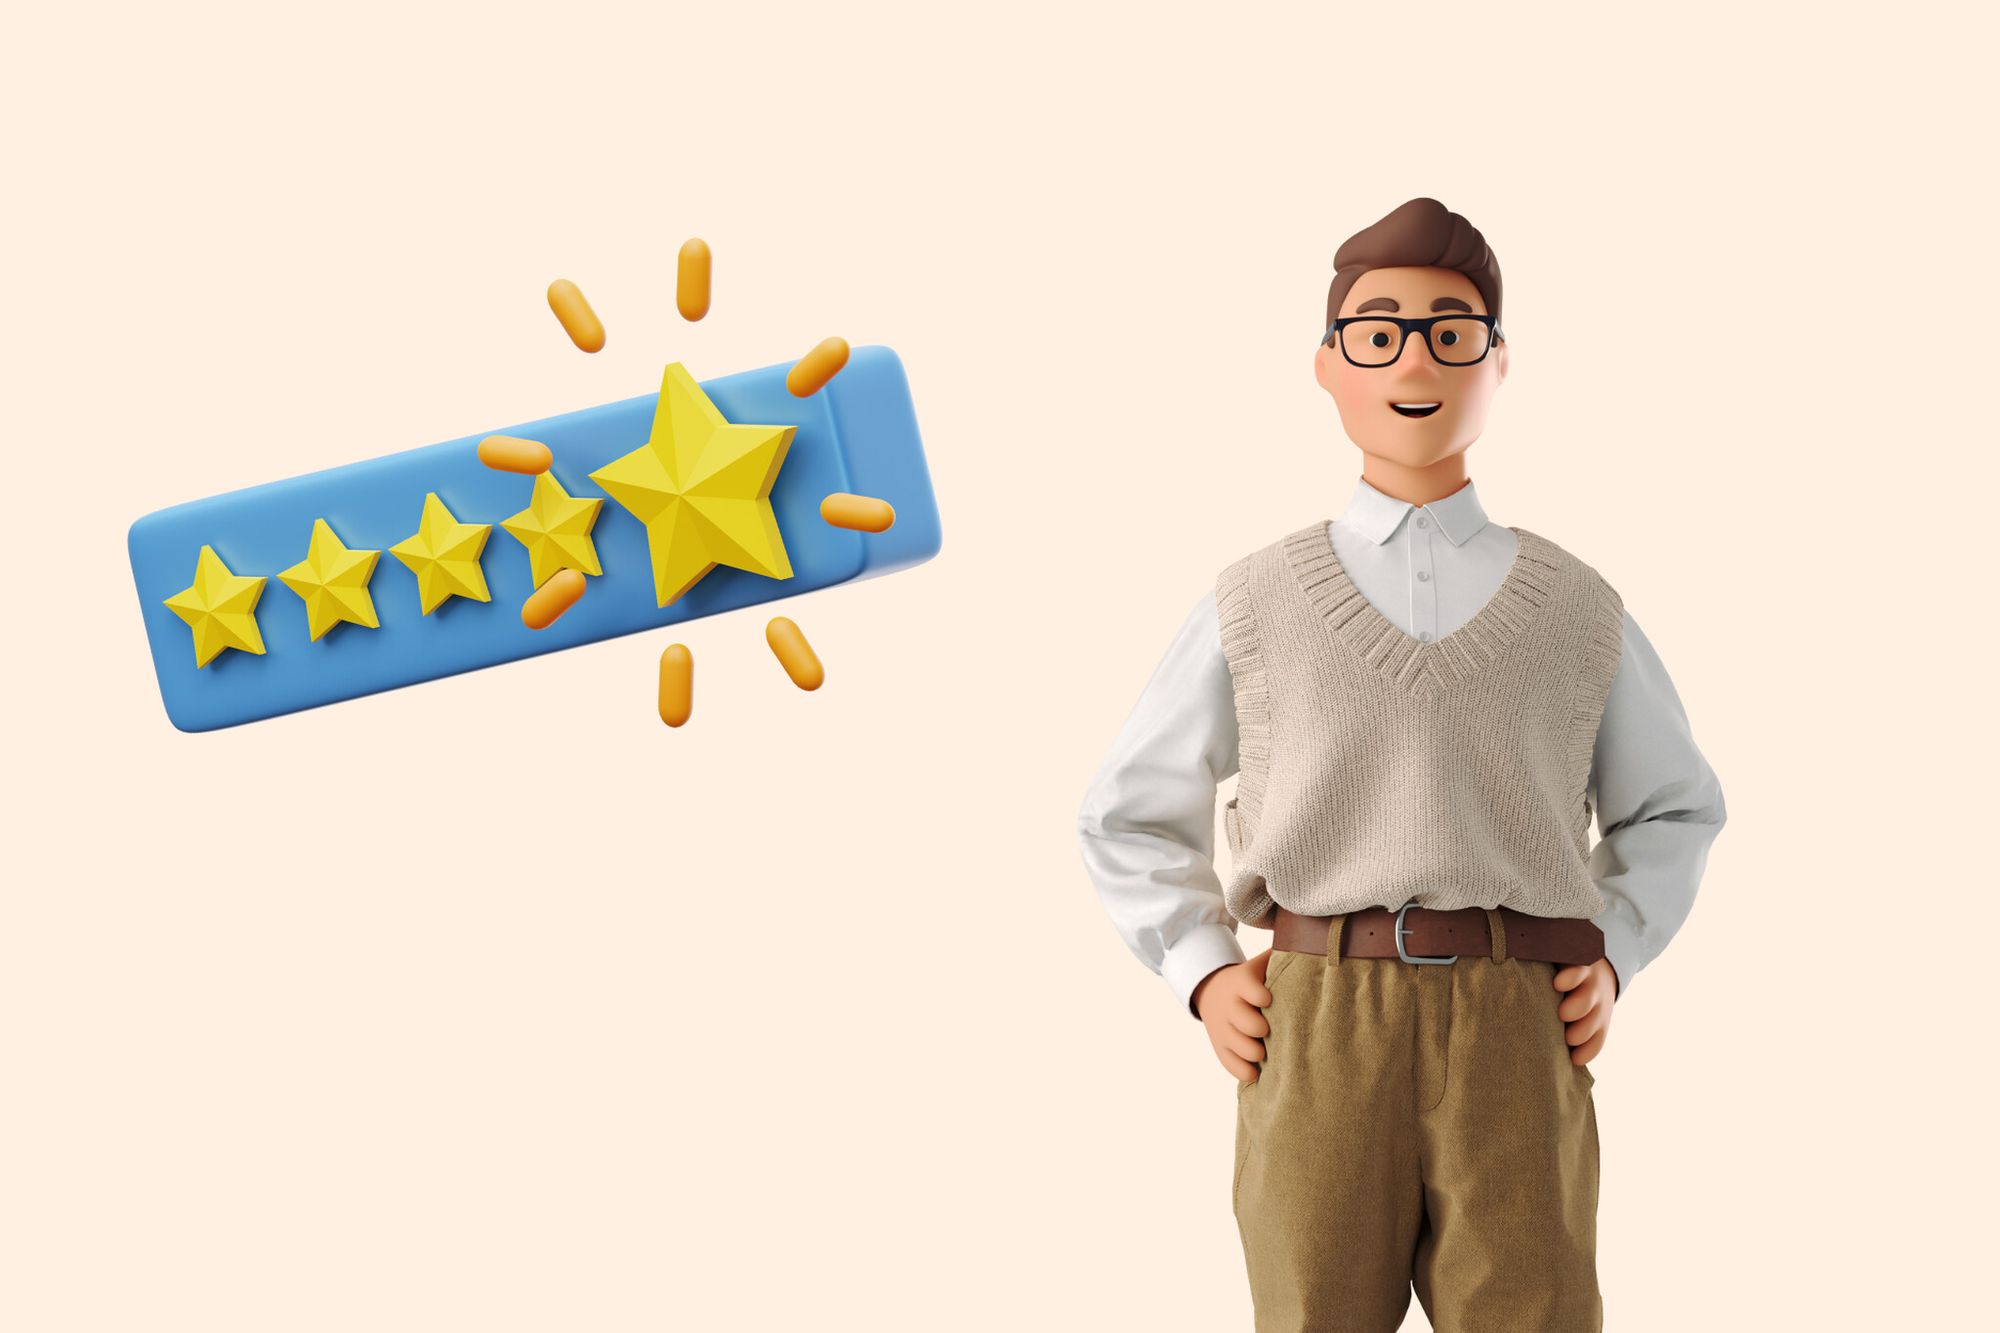 an illustration of 5 stars for review and a man standing